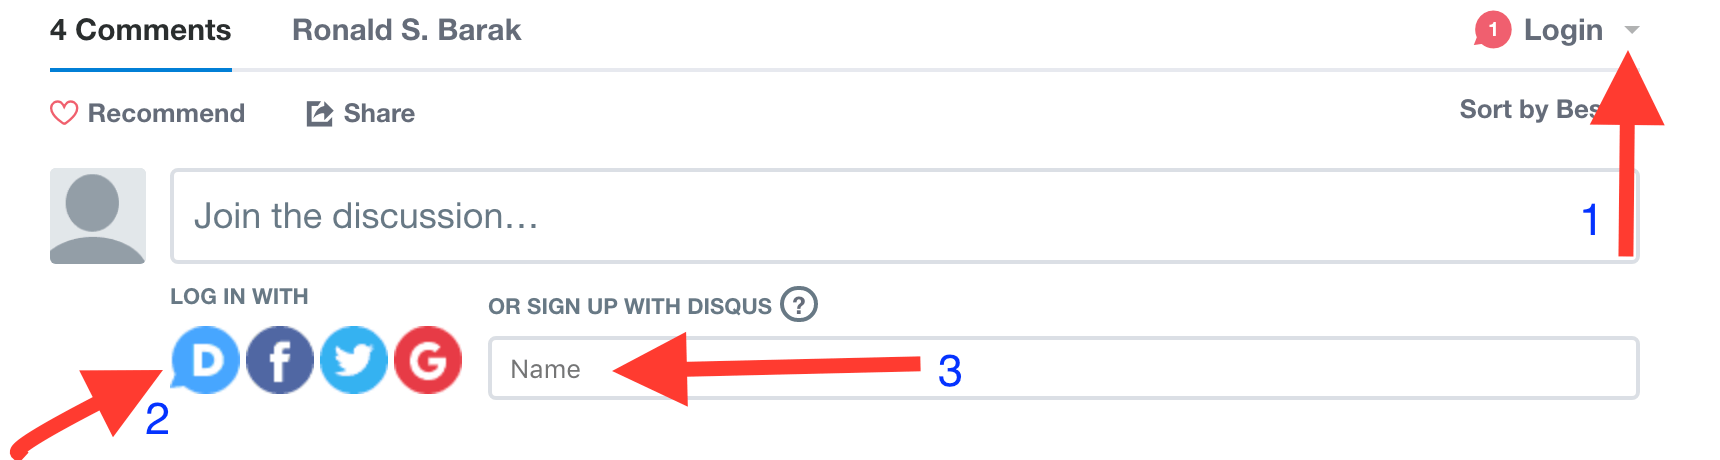 creating an account with Disqus